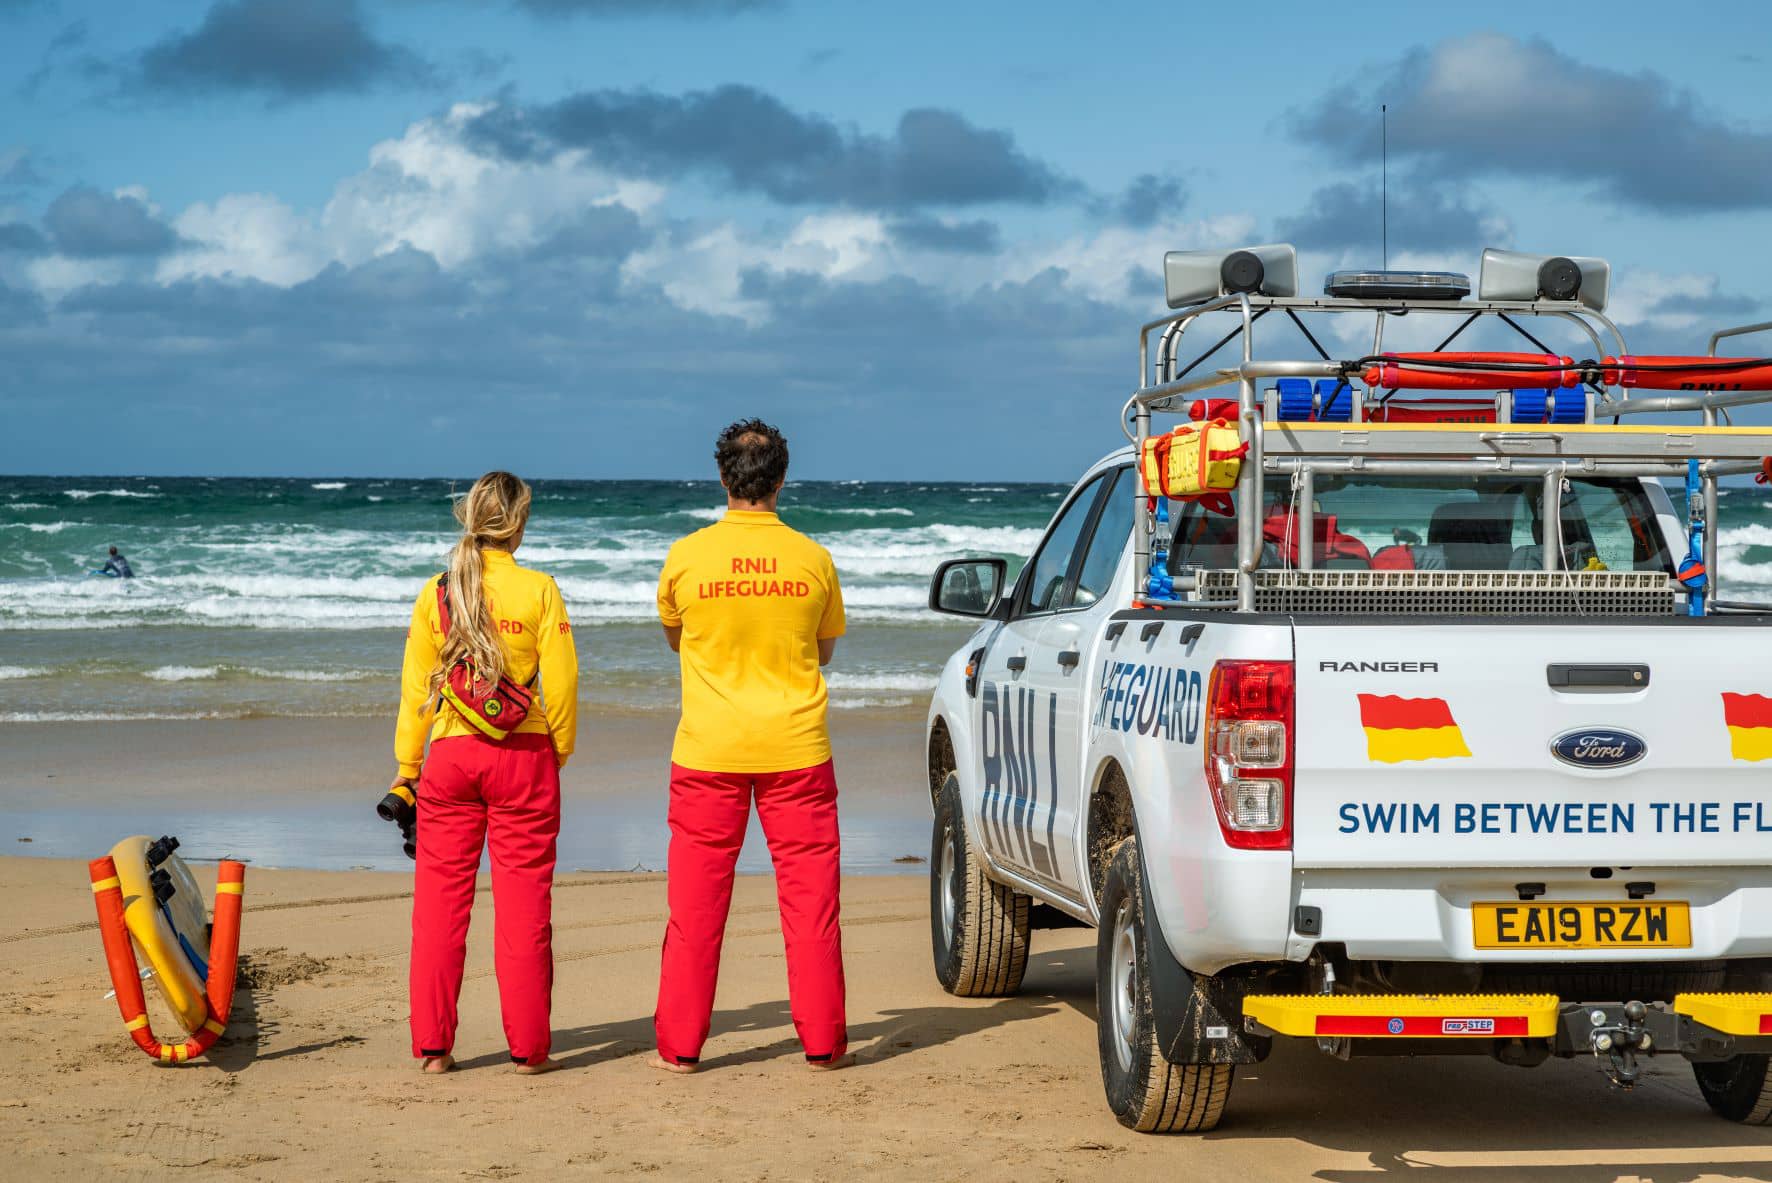 RNLI livesavers looking out to sea, standing next to a vehicle